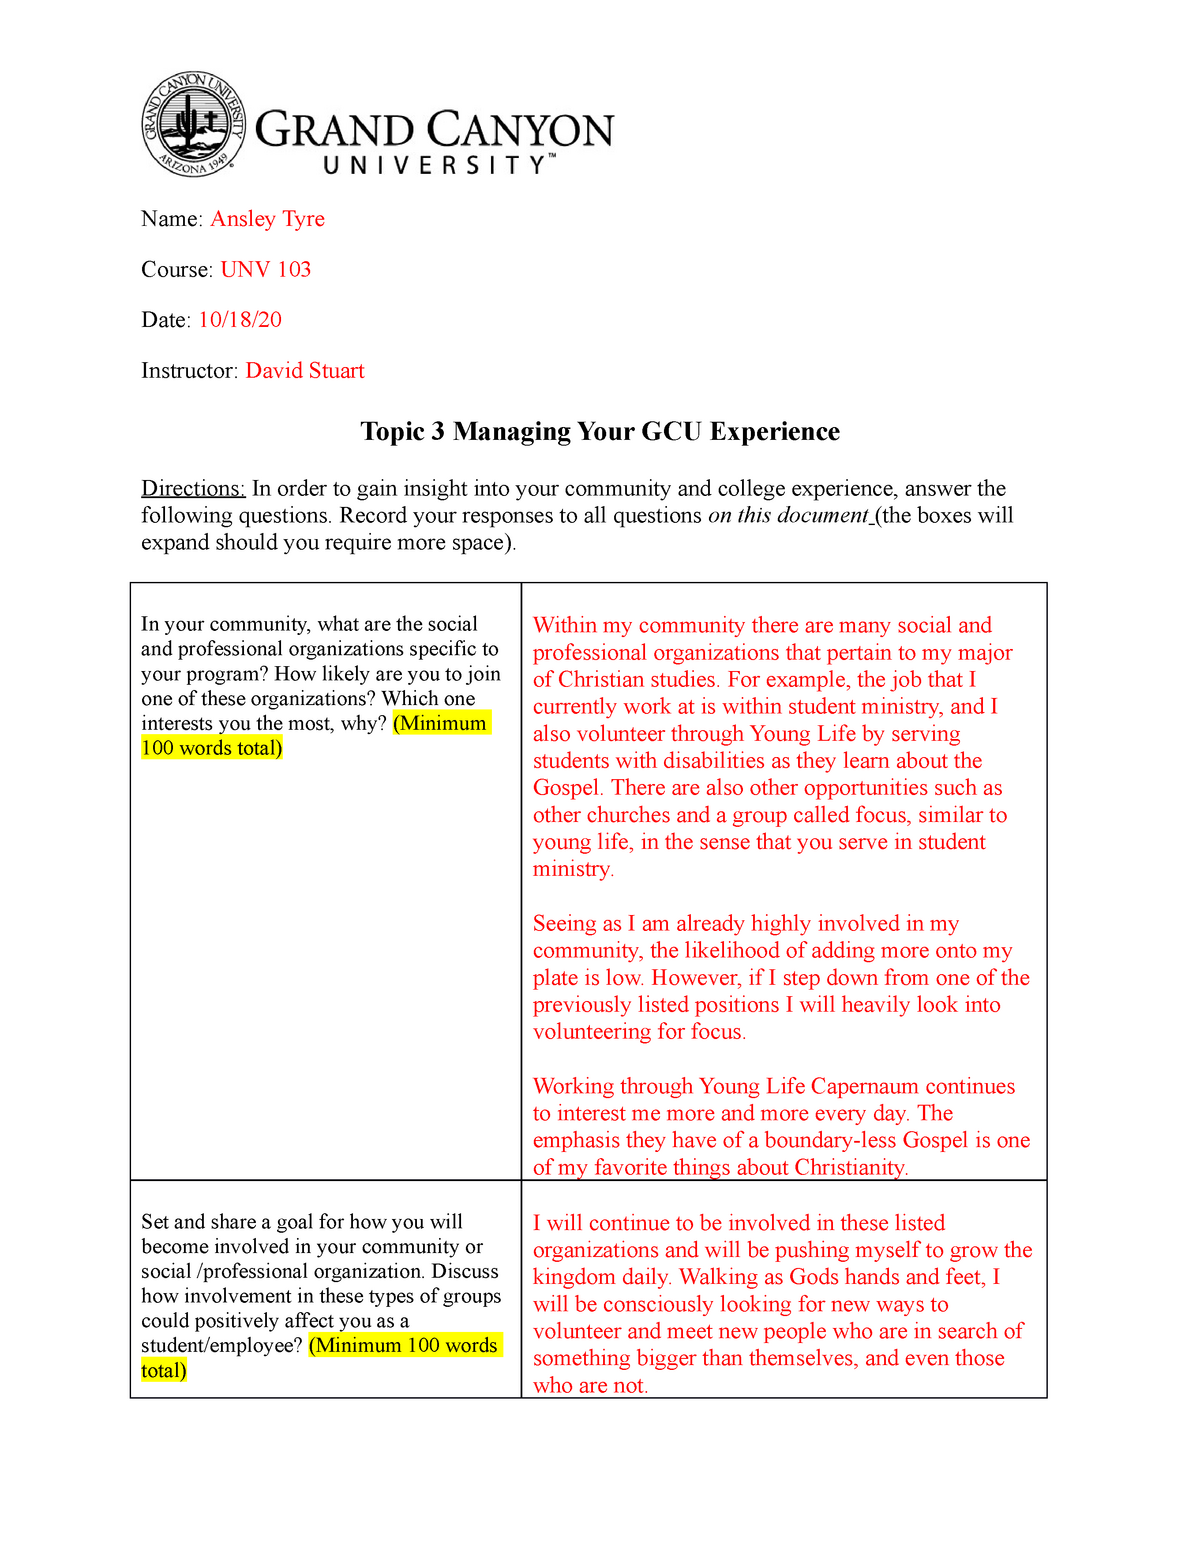 unv-103-topic-3-managing-your-gcu-experience-worksheet-example-dns